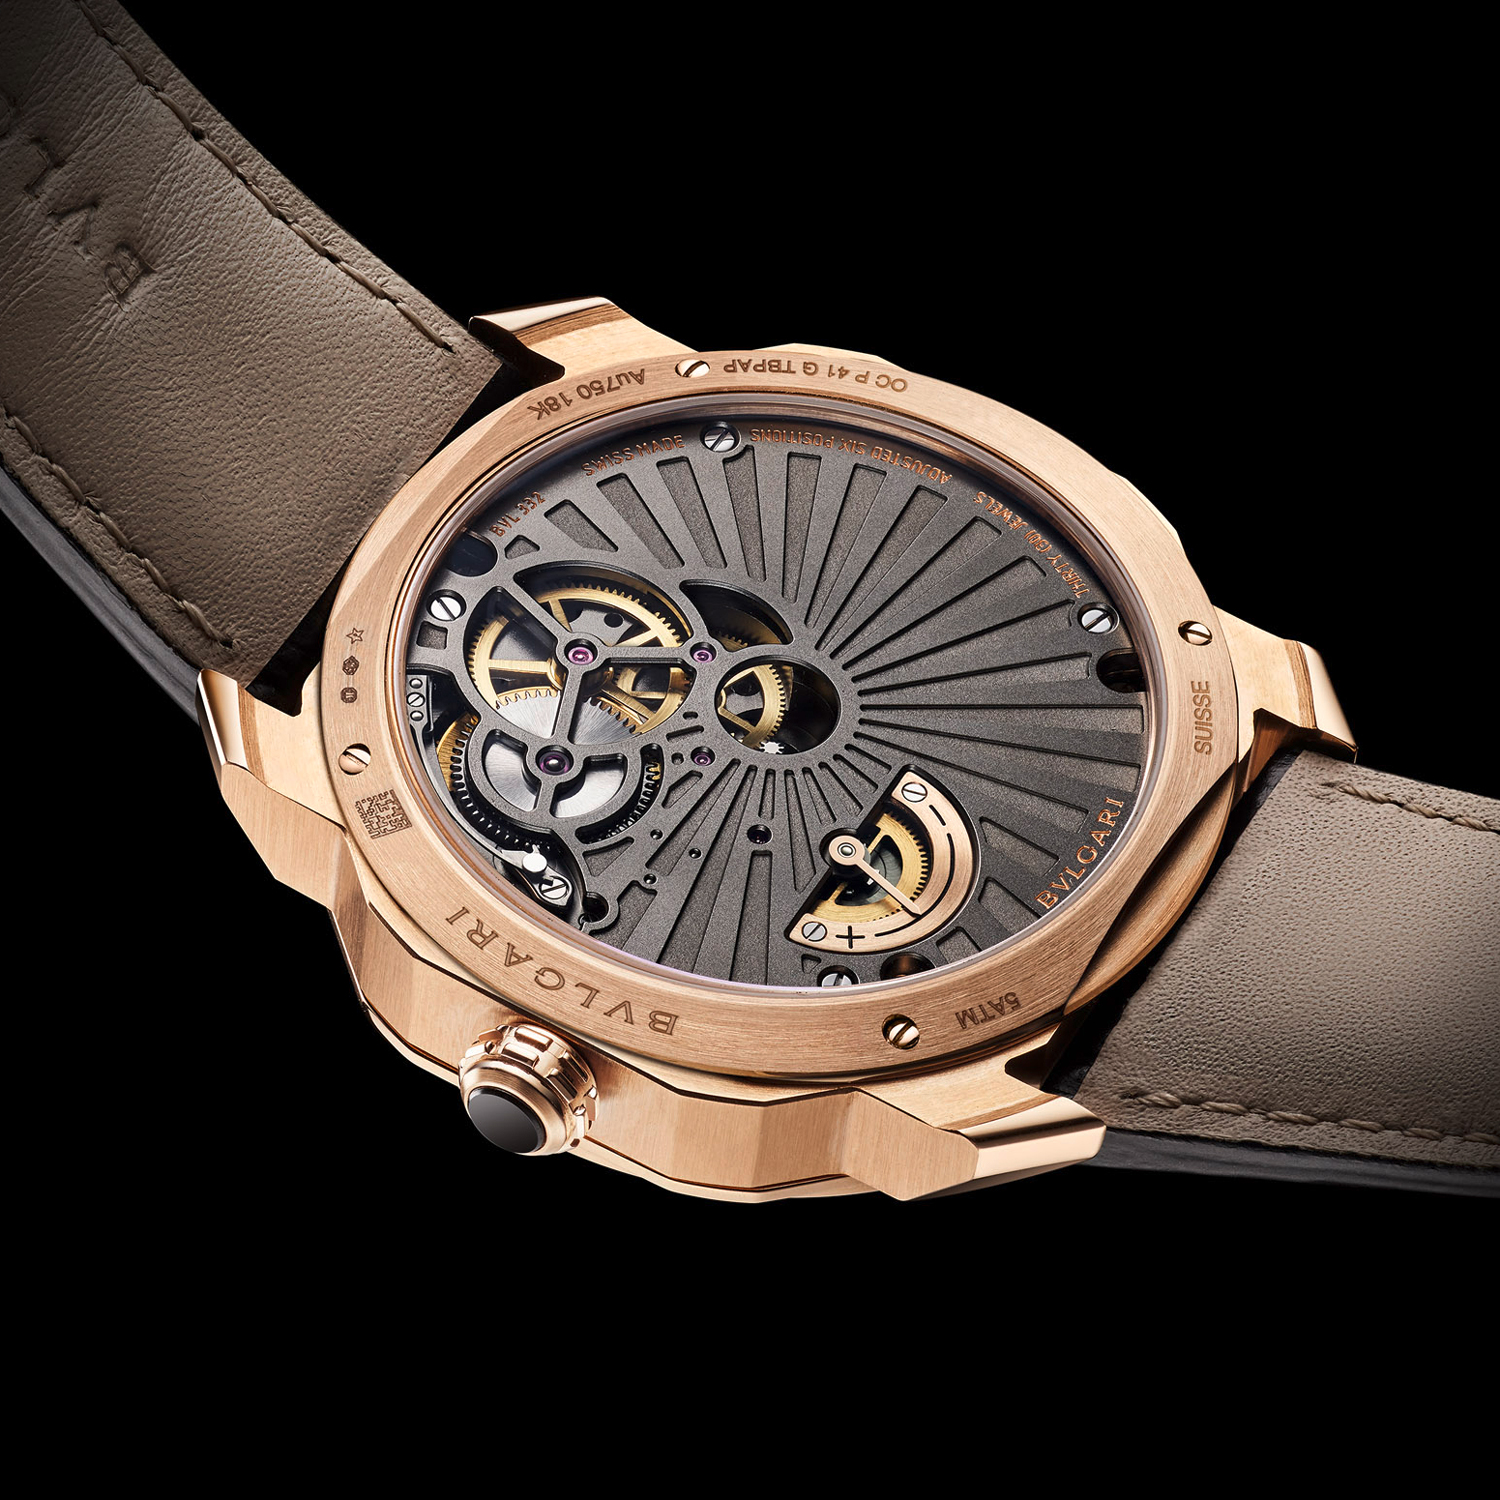 The Octo Roma Tourbillon Central Papillon is powered by the Calibre BVL 332, which has a total power reserve of 60 hours.